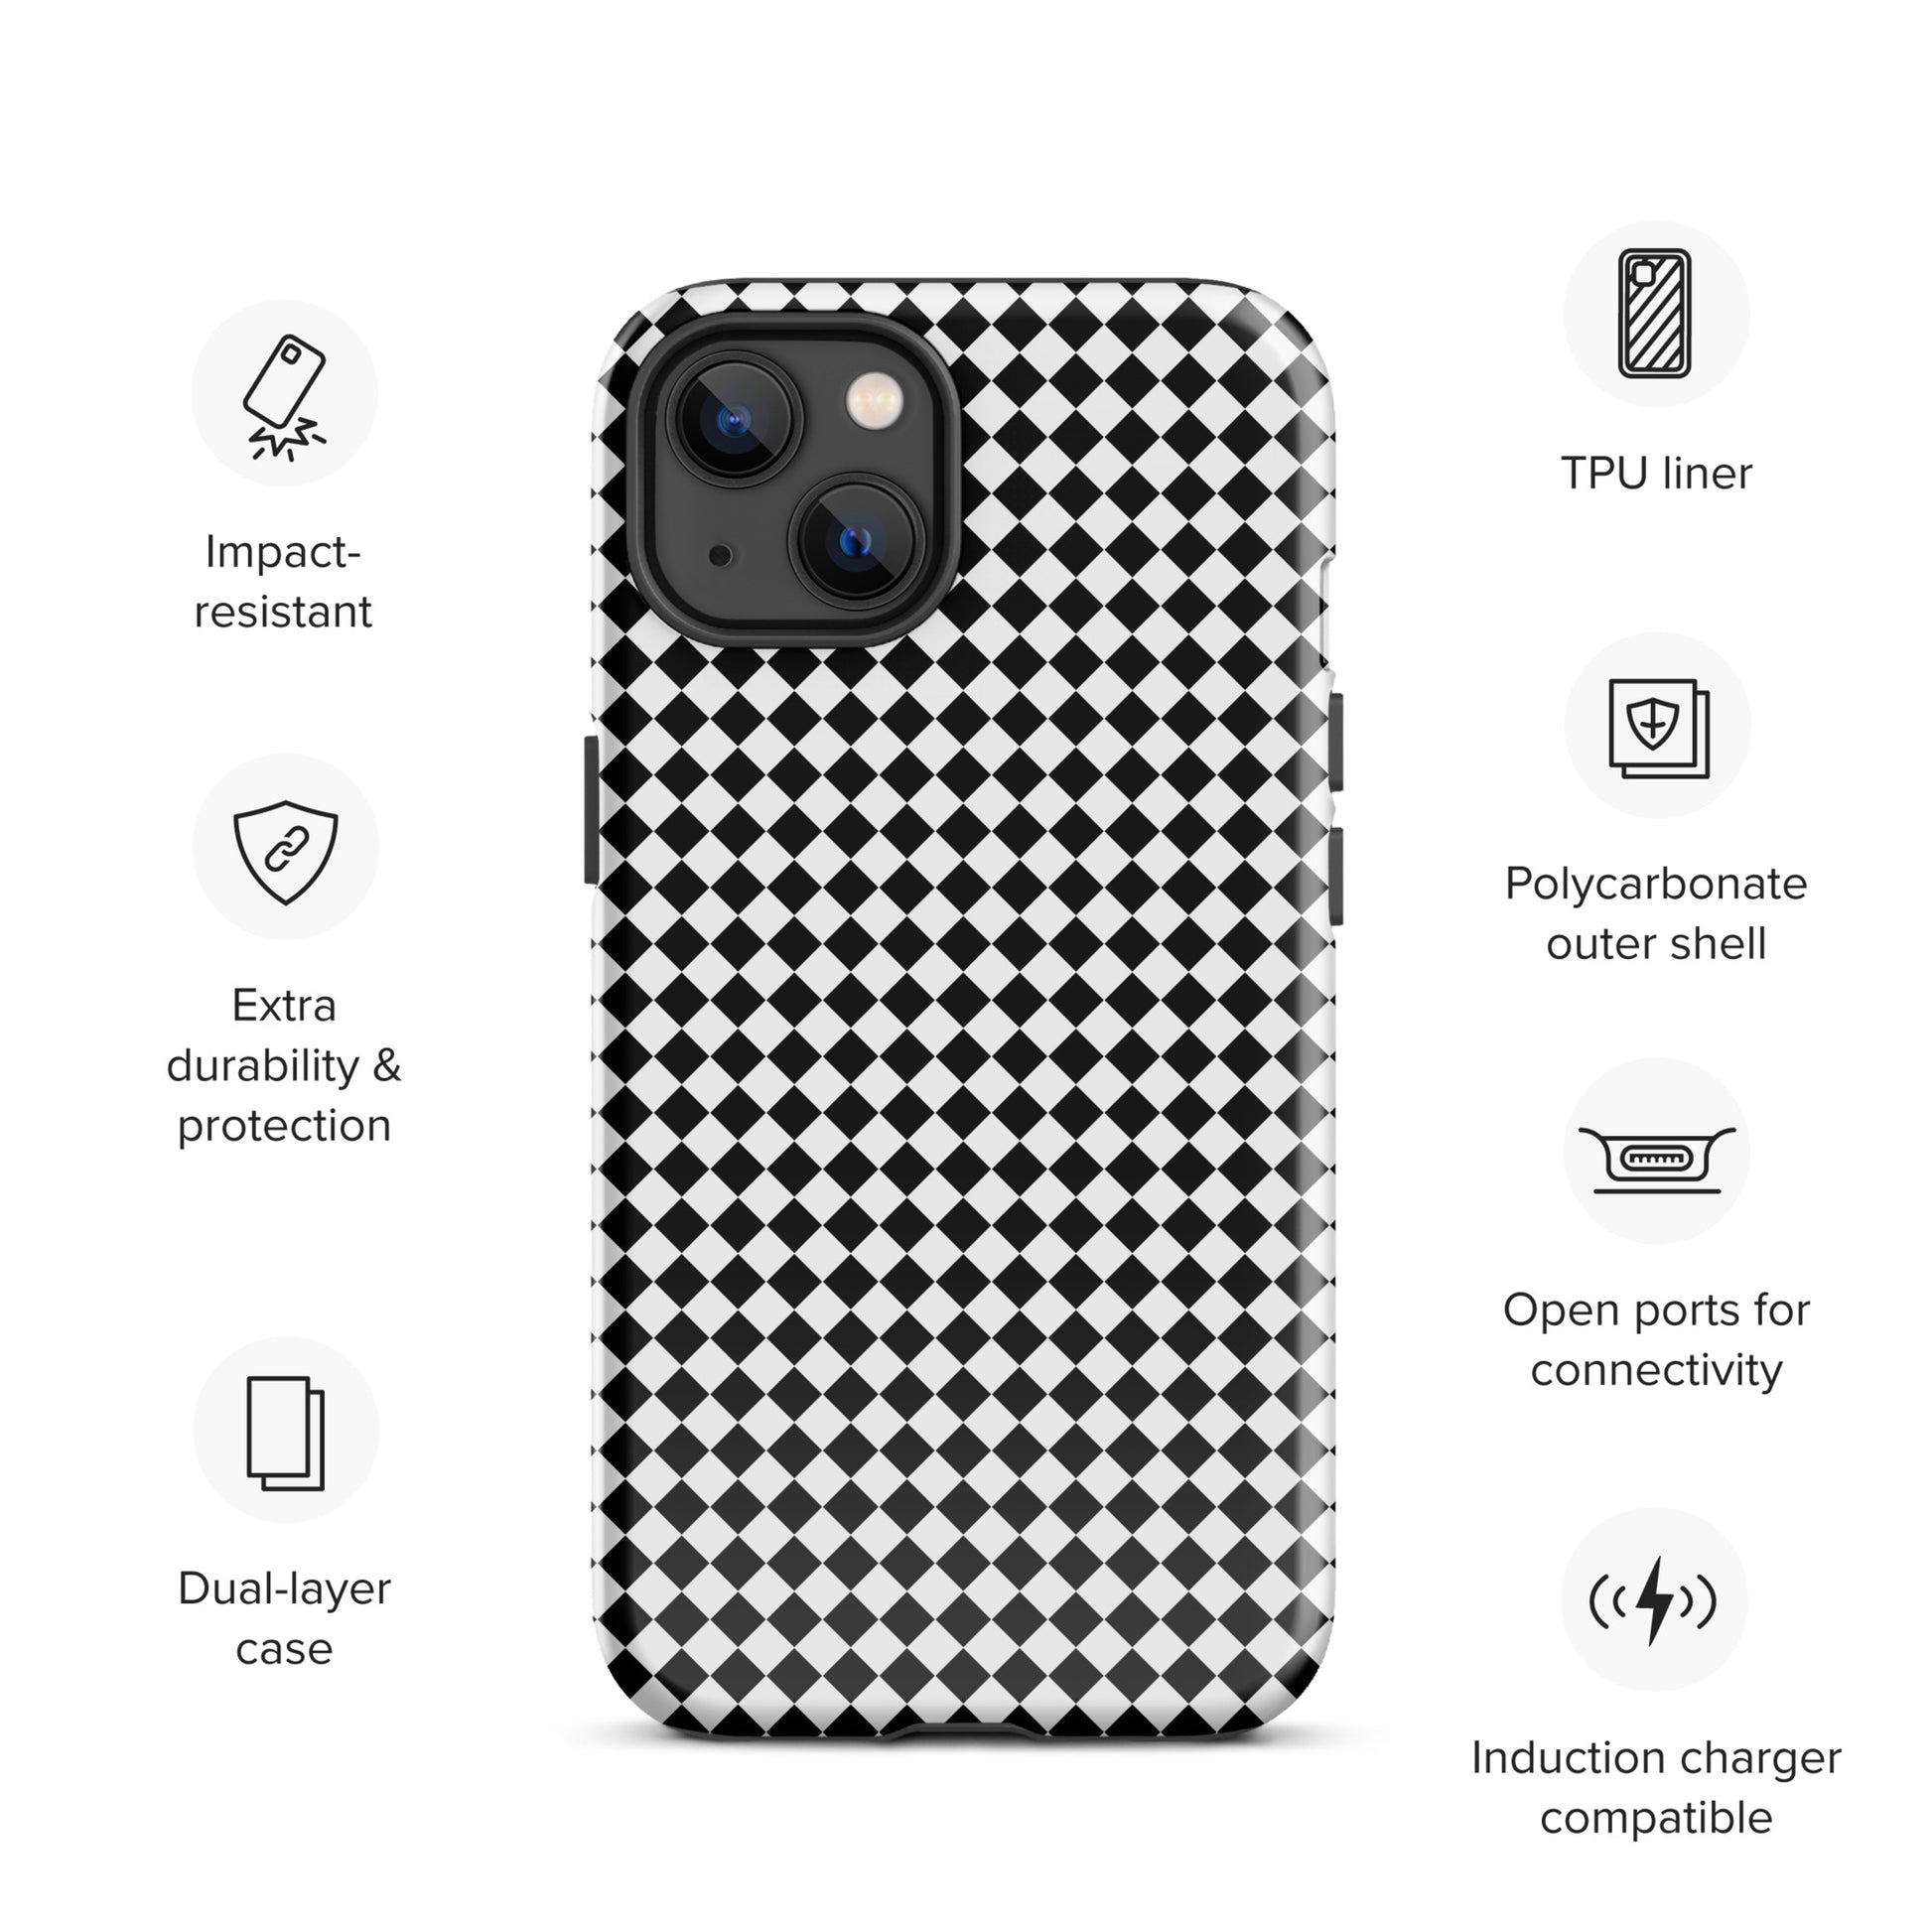 Tough case for Iphone with a print of a chessboard